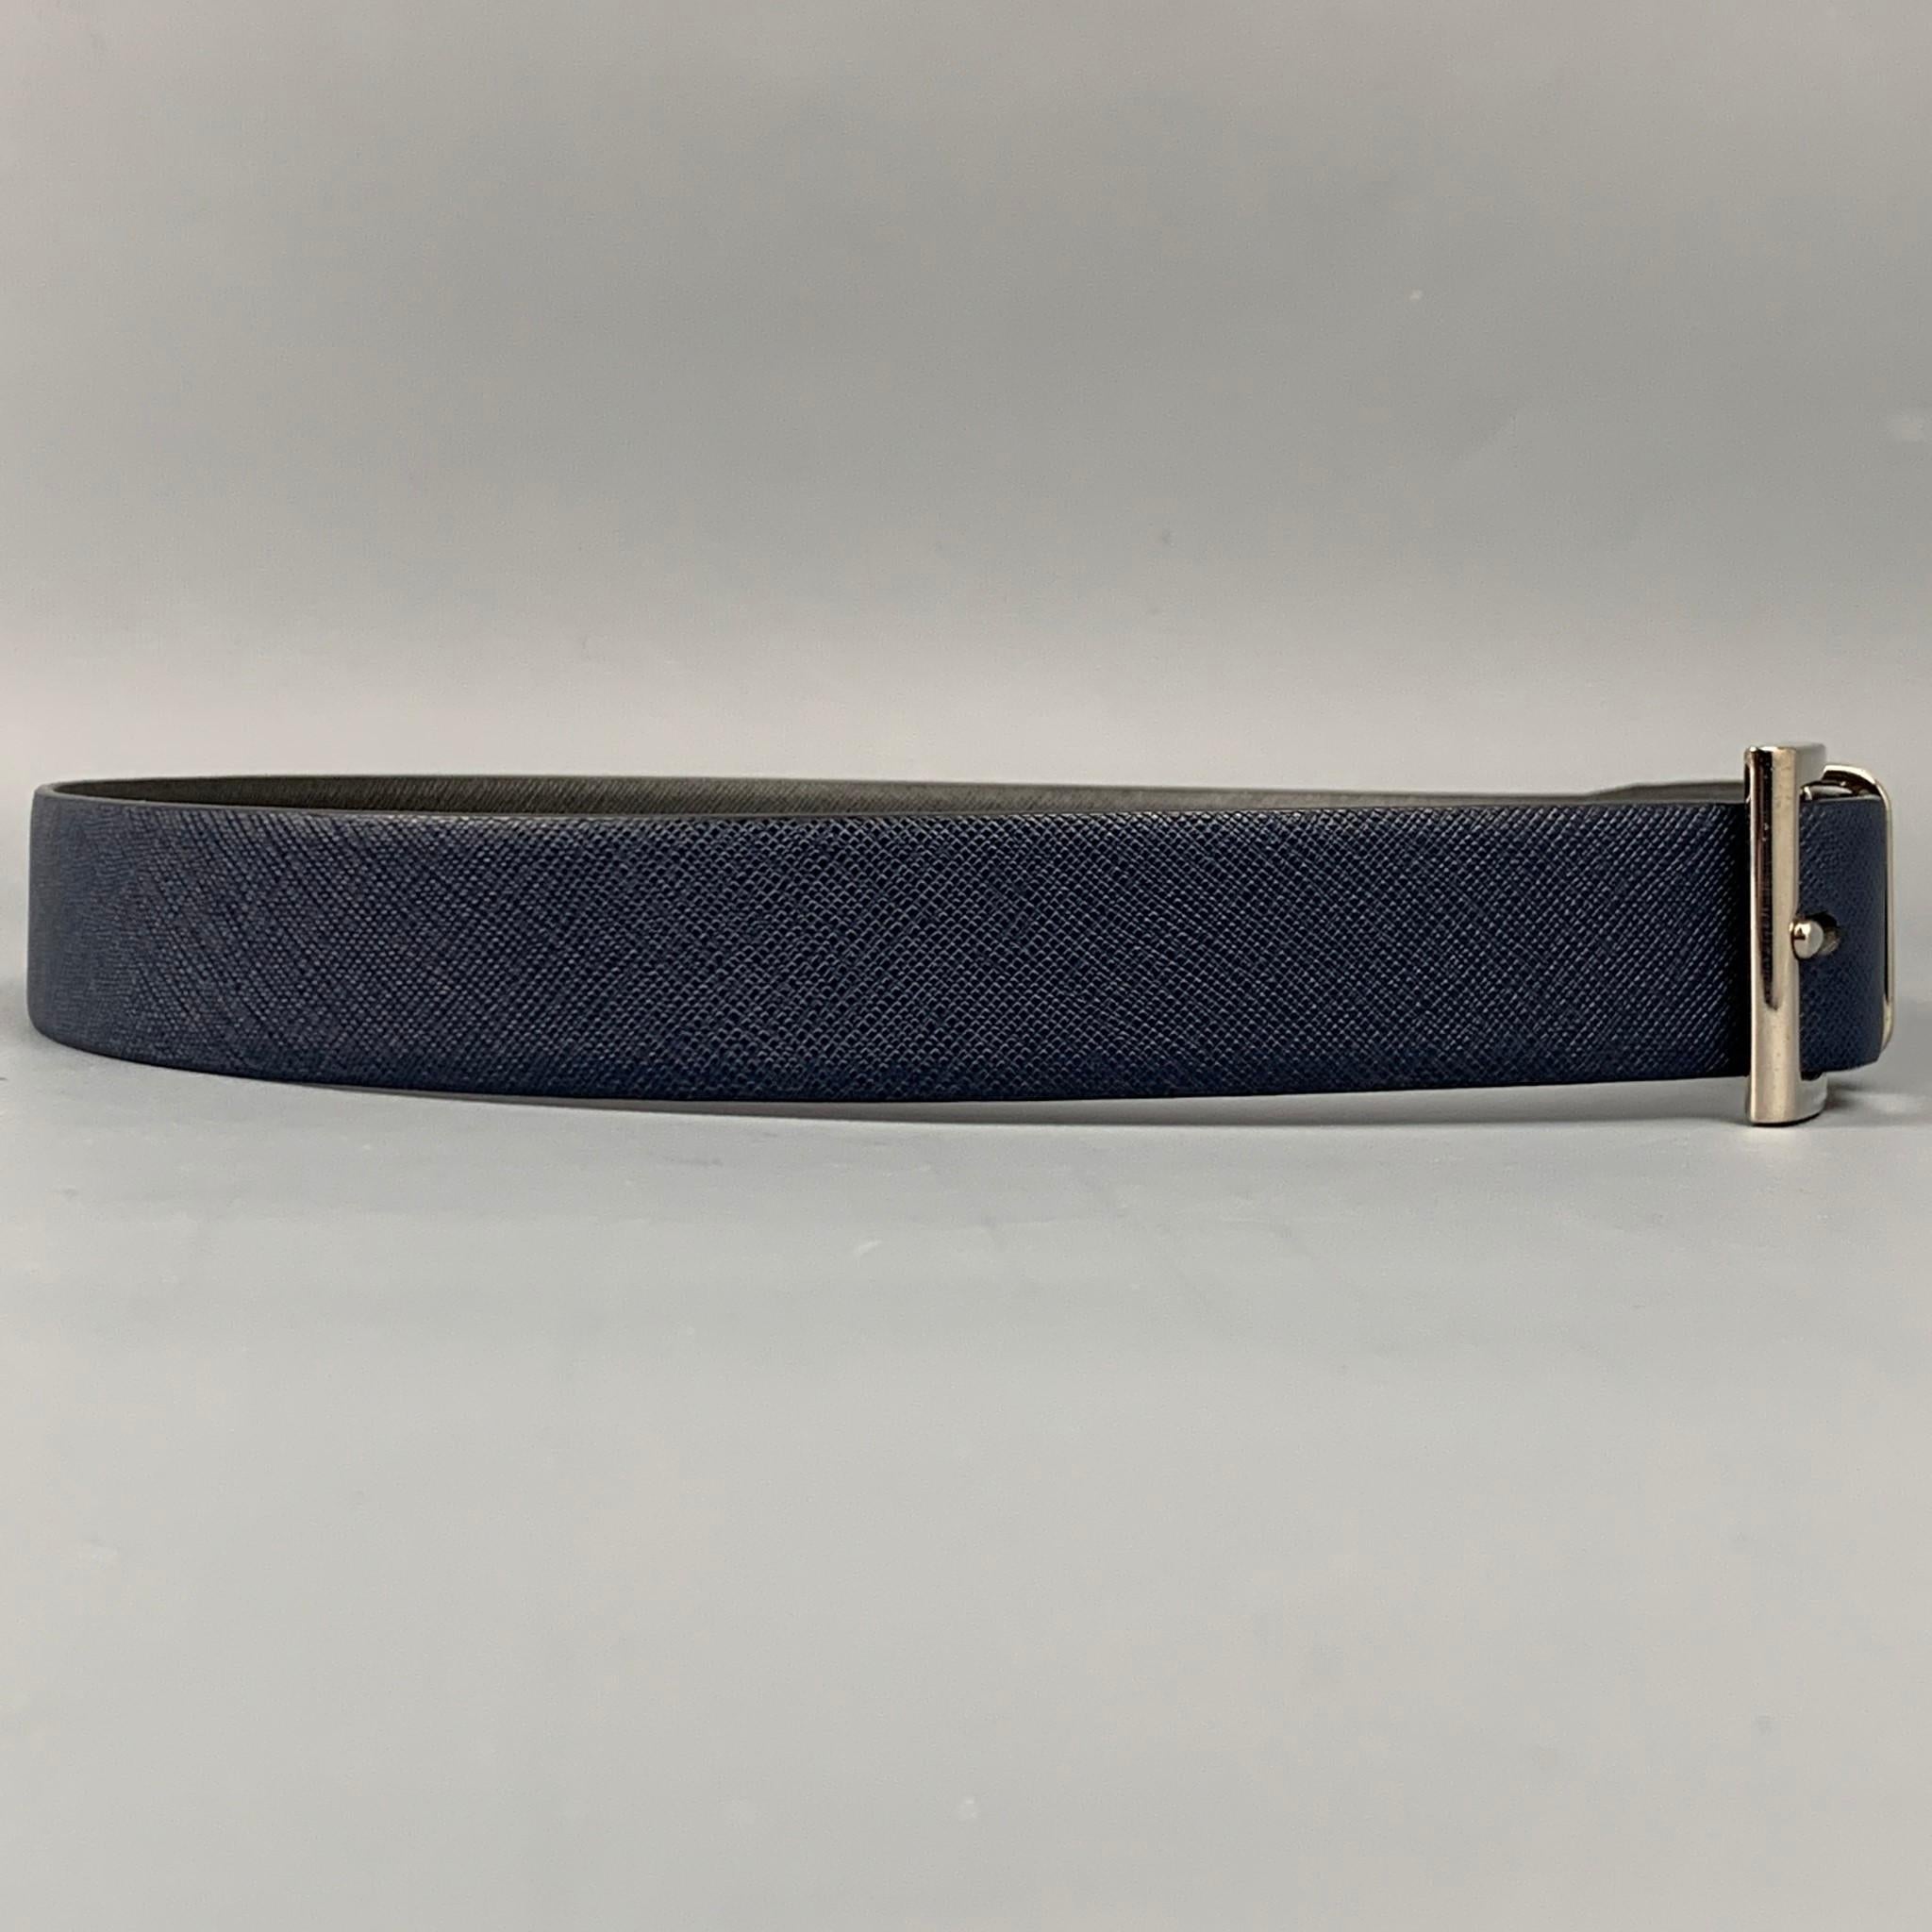 PRADA belt comes in a navy & grey saffiano leather featuring a reversible style and a silver tone buckle. Made in Italy.

Very Good Pre-Owned Condition.
Marked: 85/34 2C5333 6
Original Retail Price: $595.00

Length: 40.5 in.
Width: 1.25 in.
Fits: 32